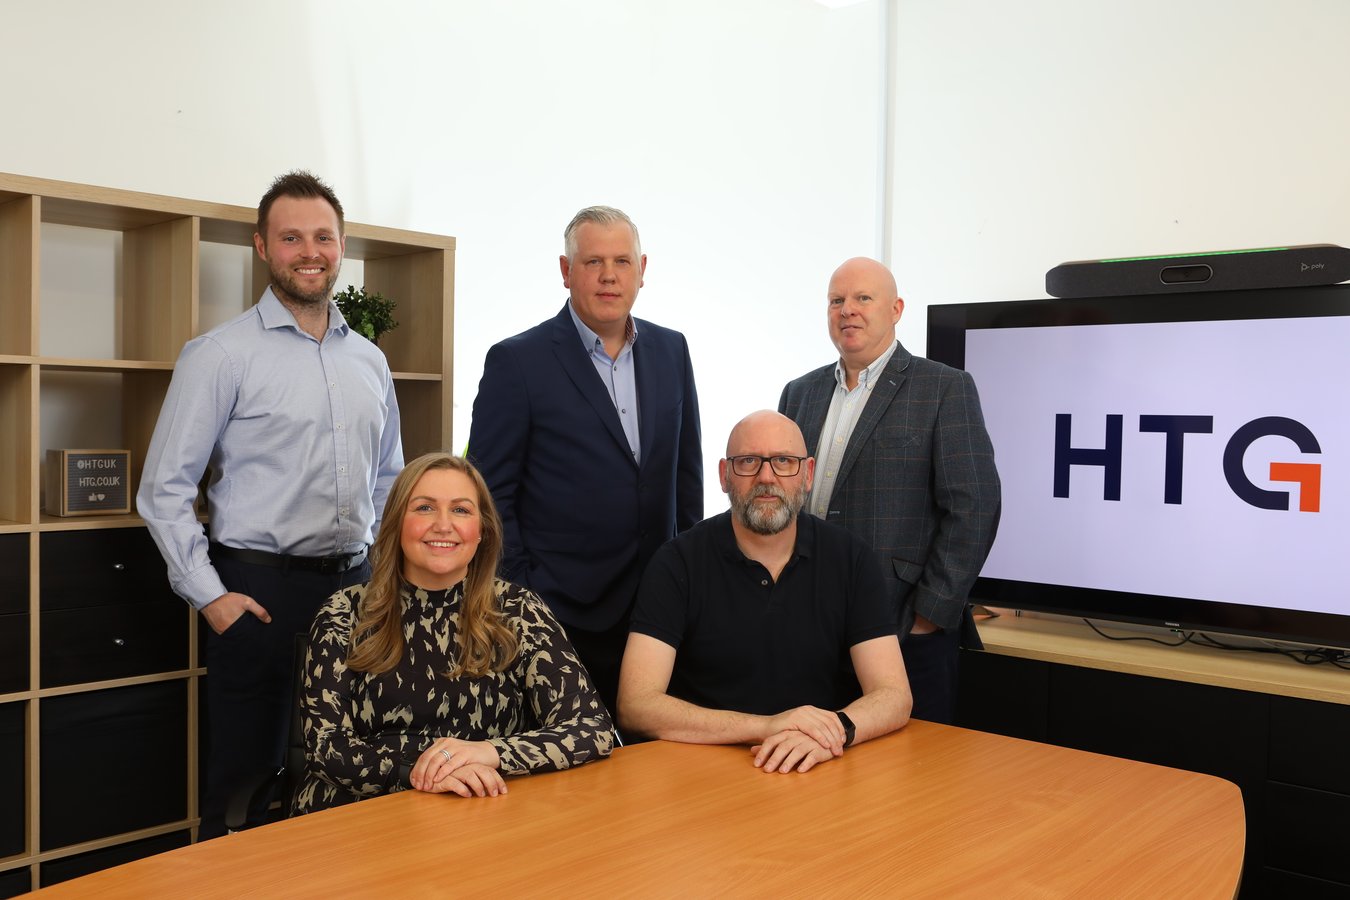 Cloud Experts HTG Make Senior Appointments